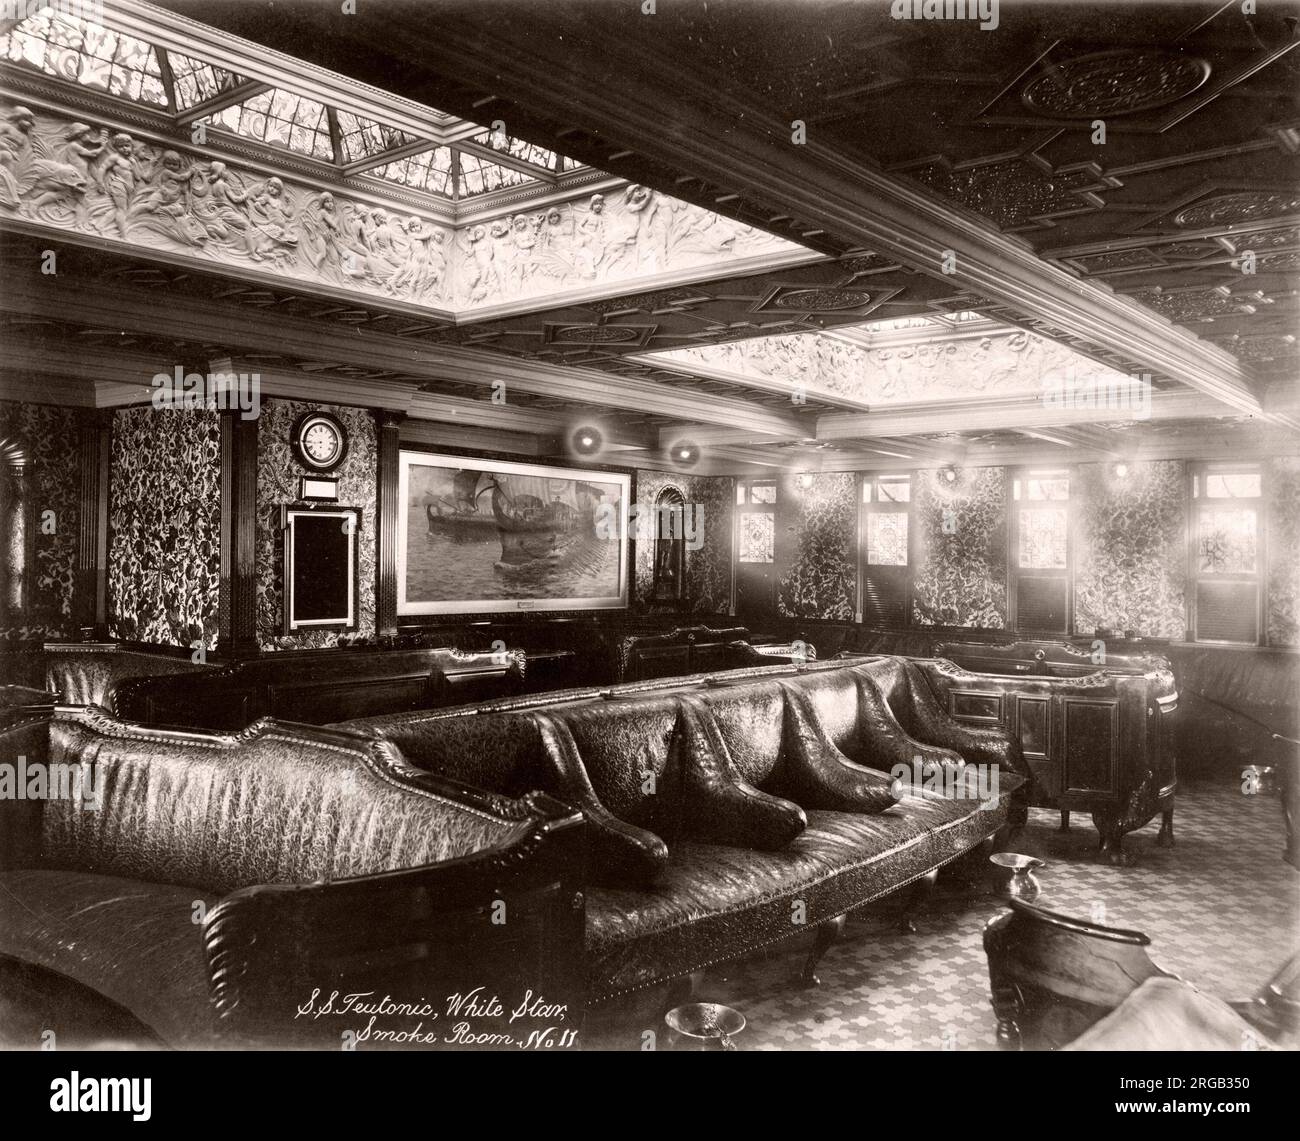 1889 photograph - RMS Teutonic - from an album of images relating to the launch of the vessel, which was built by Harland and Wolff in Belfast, for the White Star Line - later to achieve notoriety as the owner of the Titanic. The album shows interiors of the ship, member of the crew, trial cruises, including a visit onboard by the German Kaiser and Prince of Wales, as well as many images of other visitors. Stock Photo